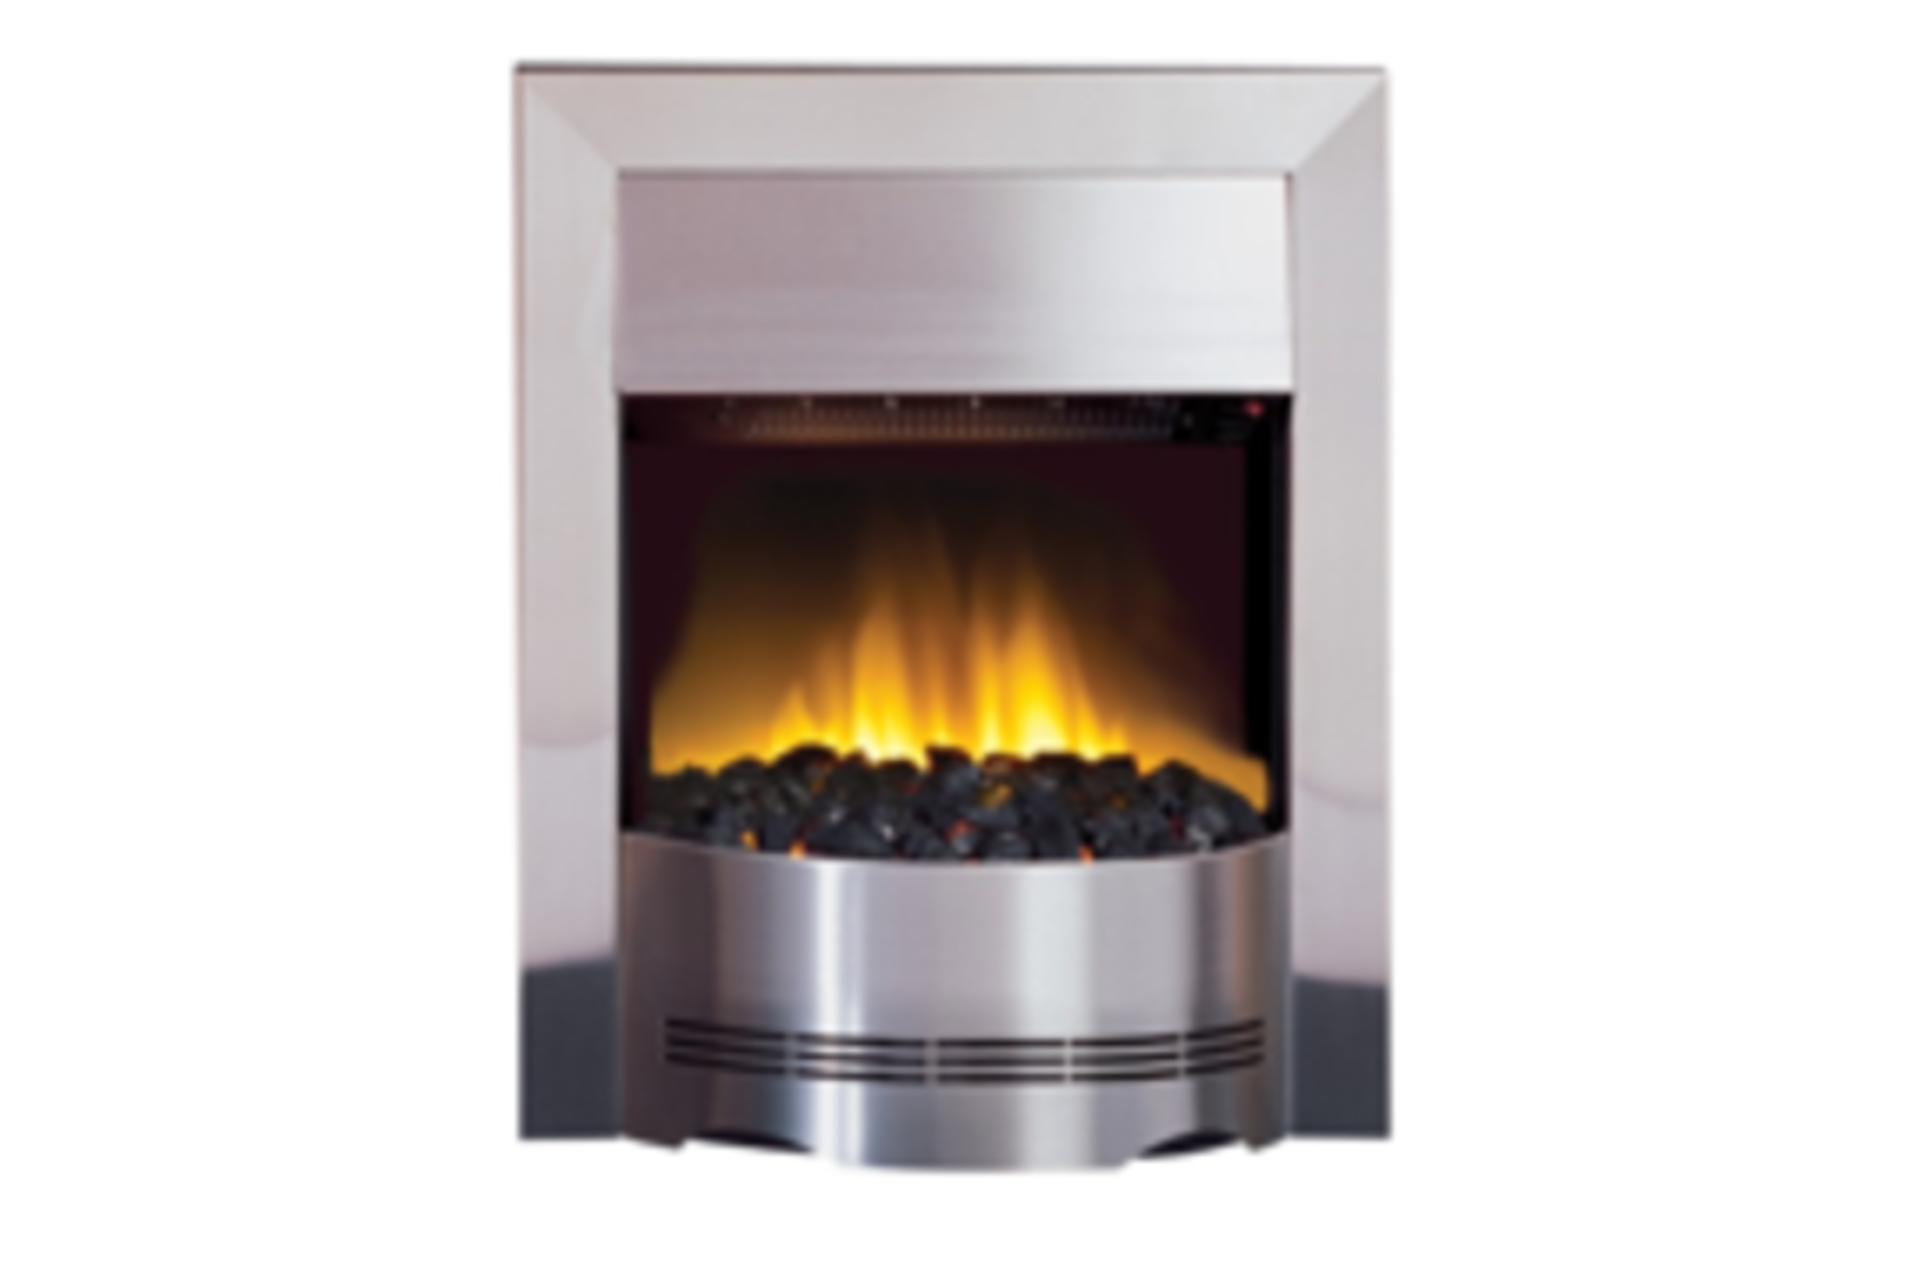 New Boxed - Dimplex Elda Optiflame Inset Electric Fire. RRP £380. An effortlessly slick and